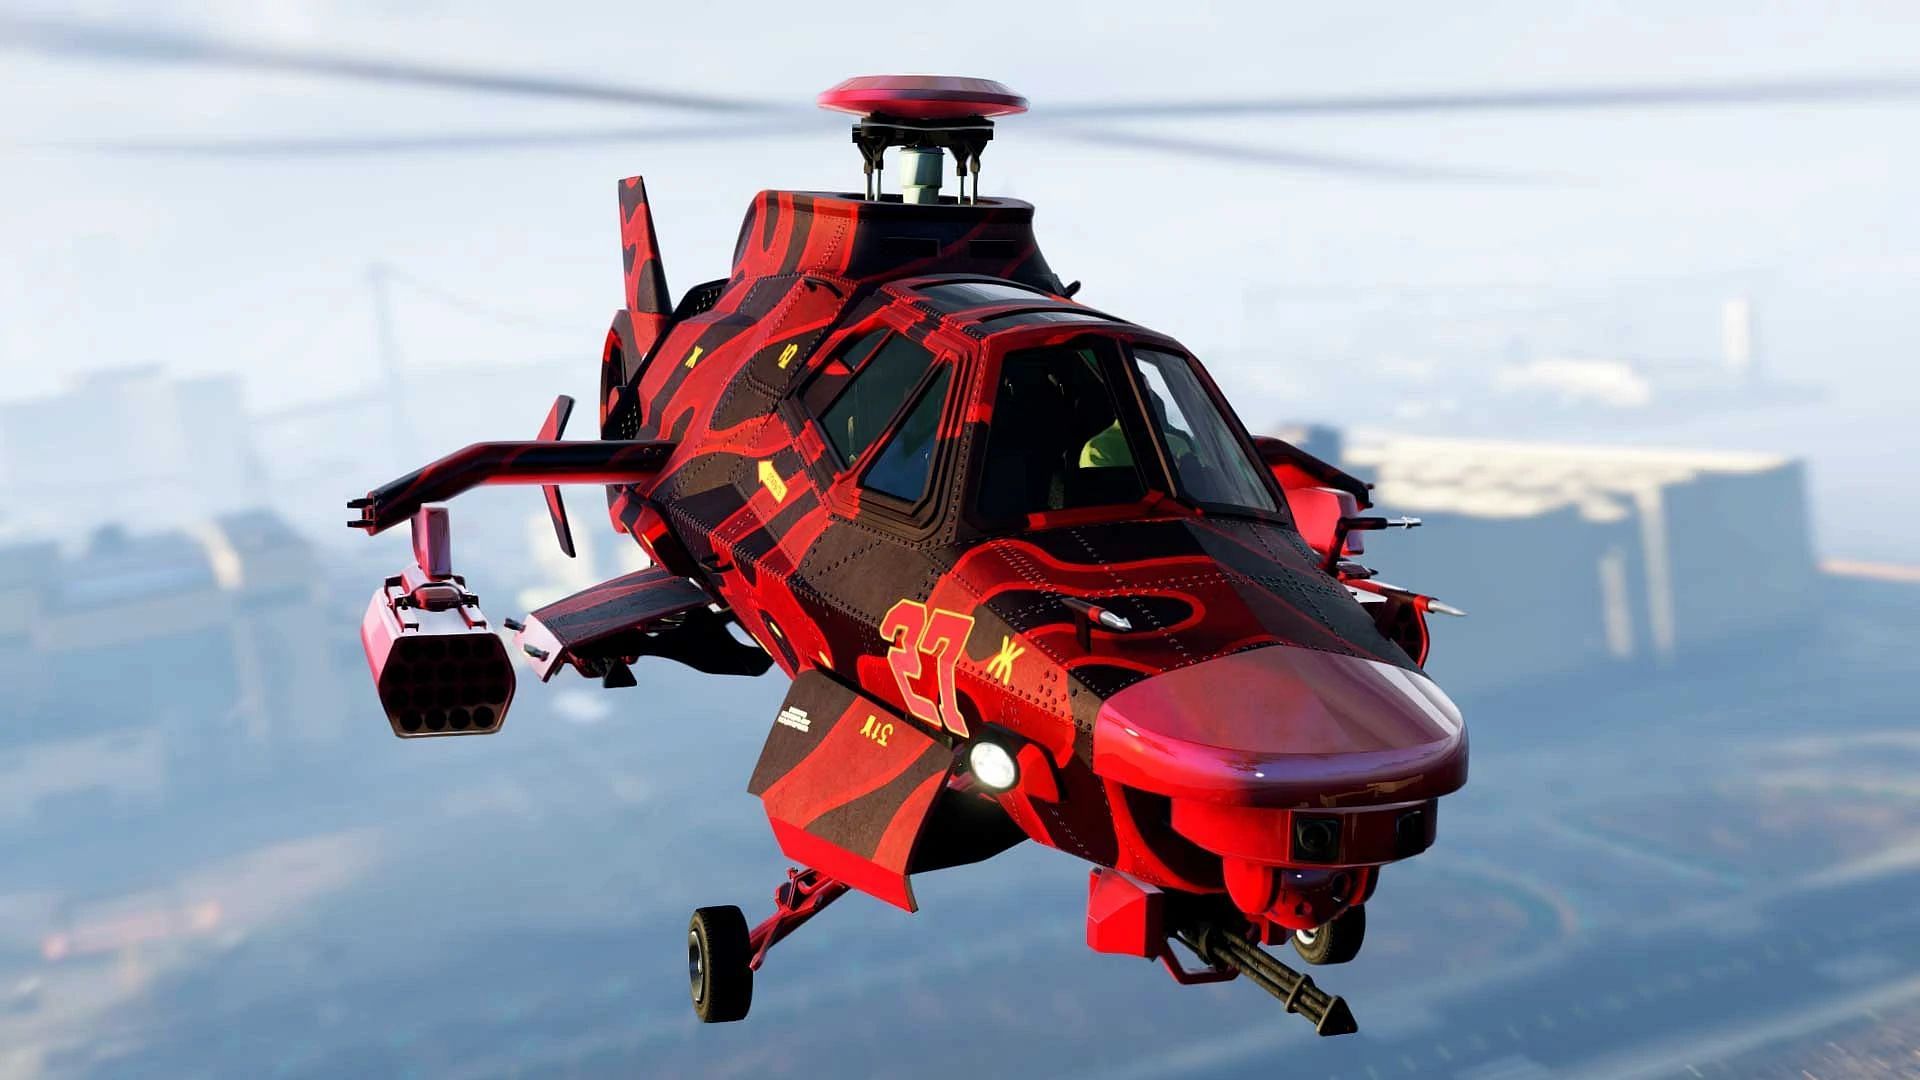 GTA 5 helicopters - list of all helicopters from GTA V